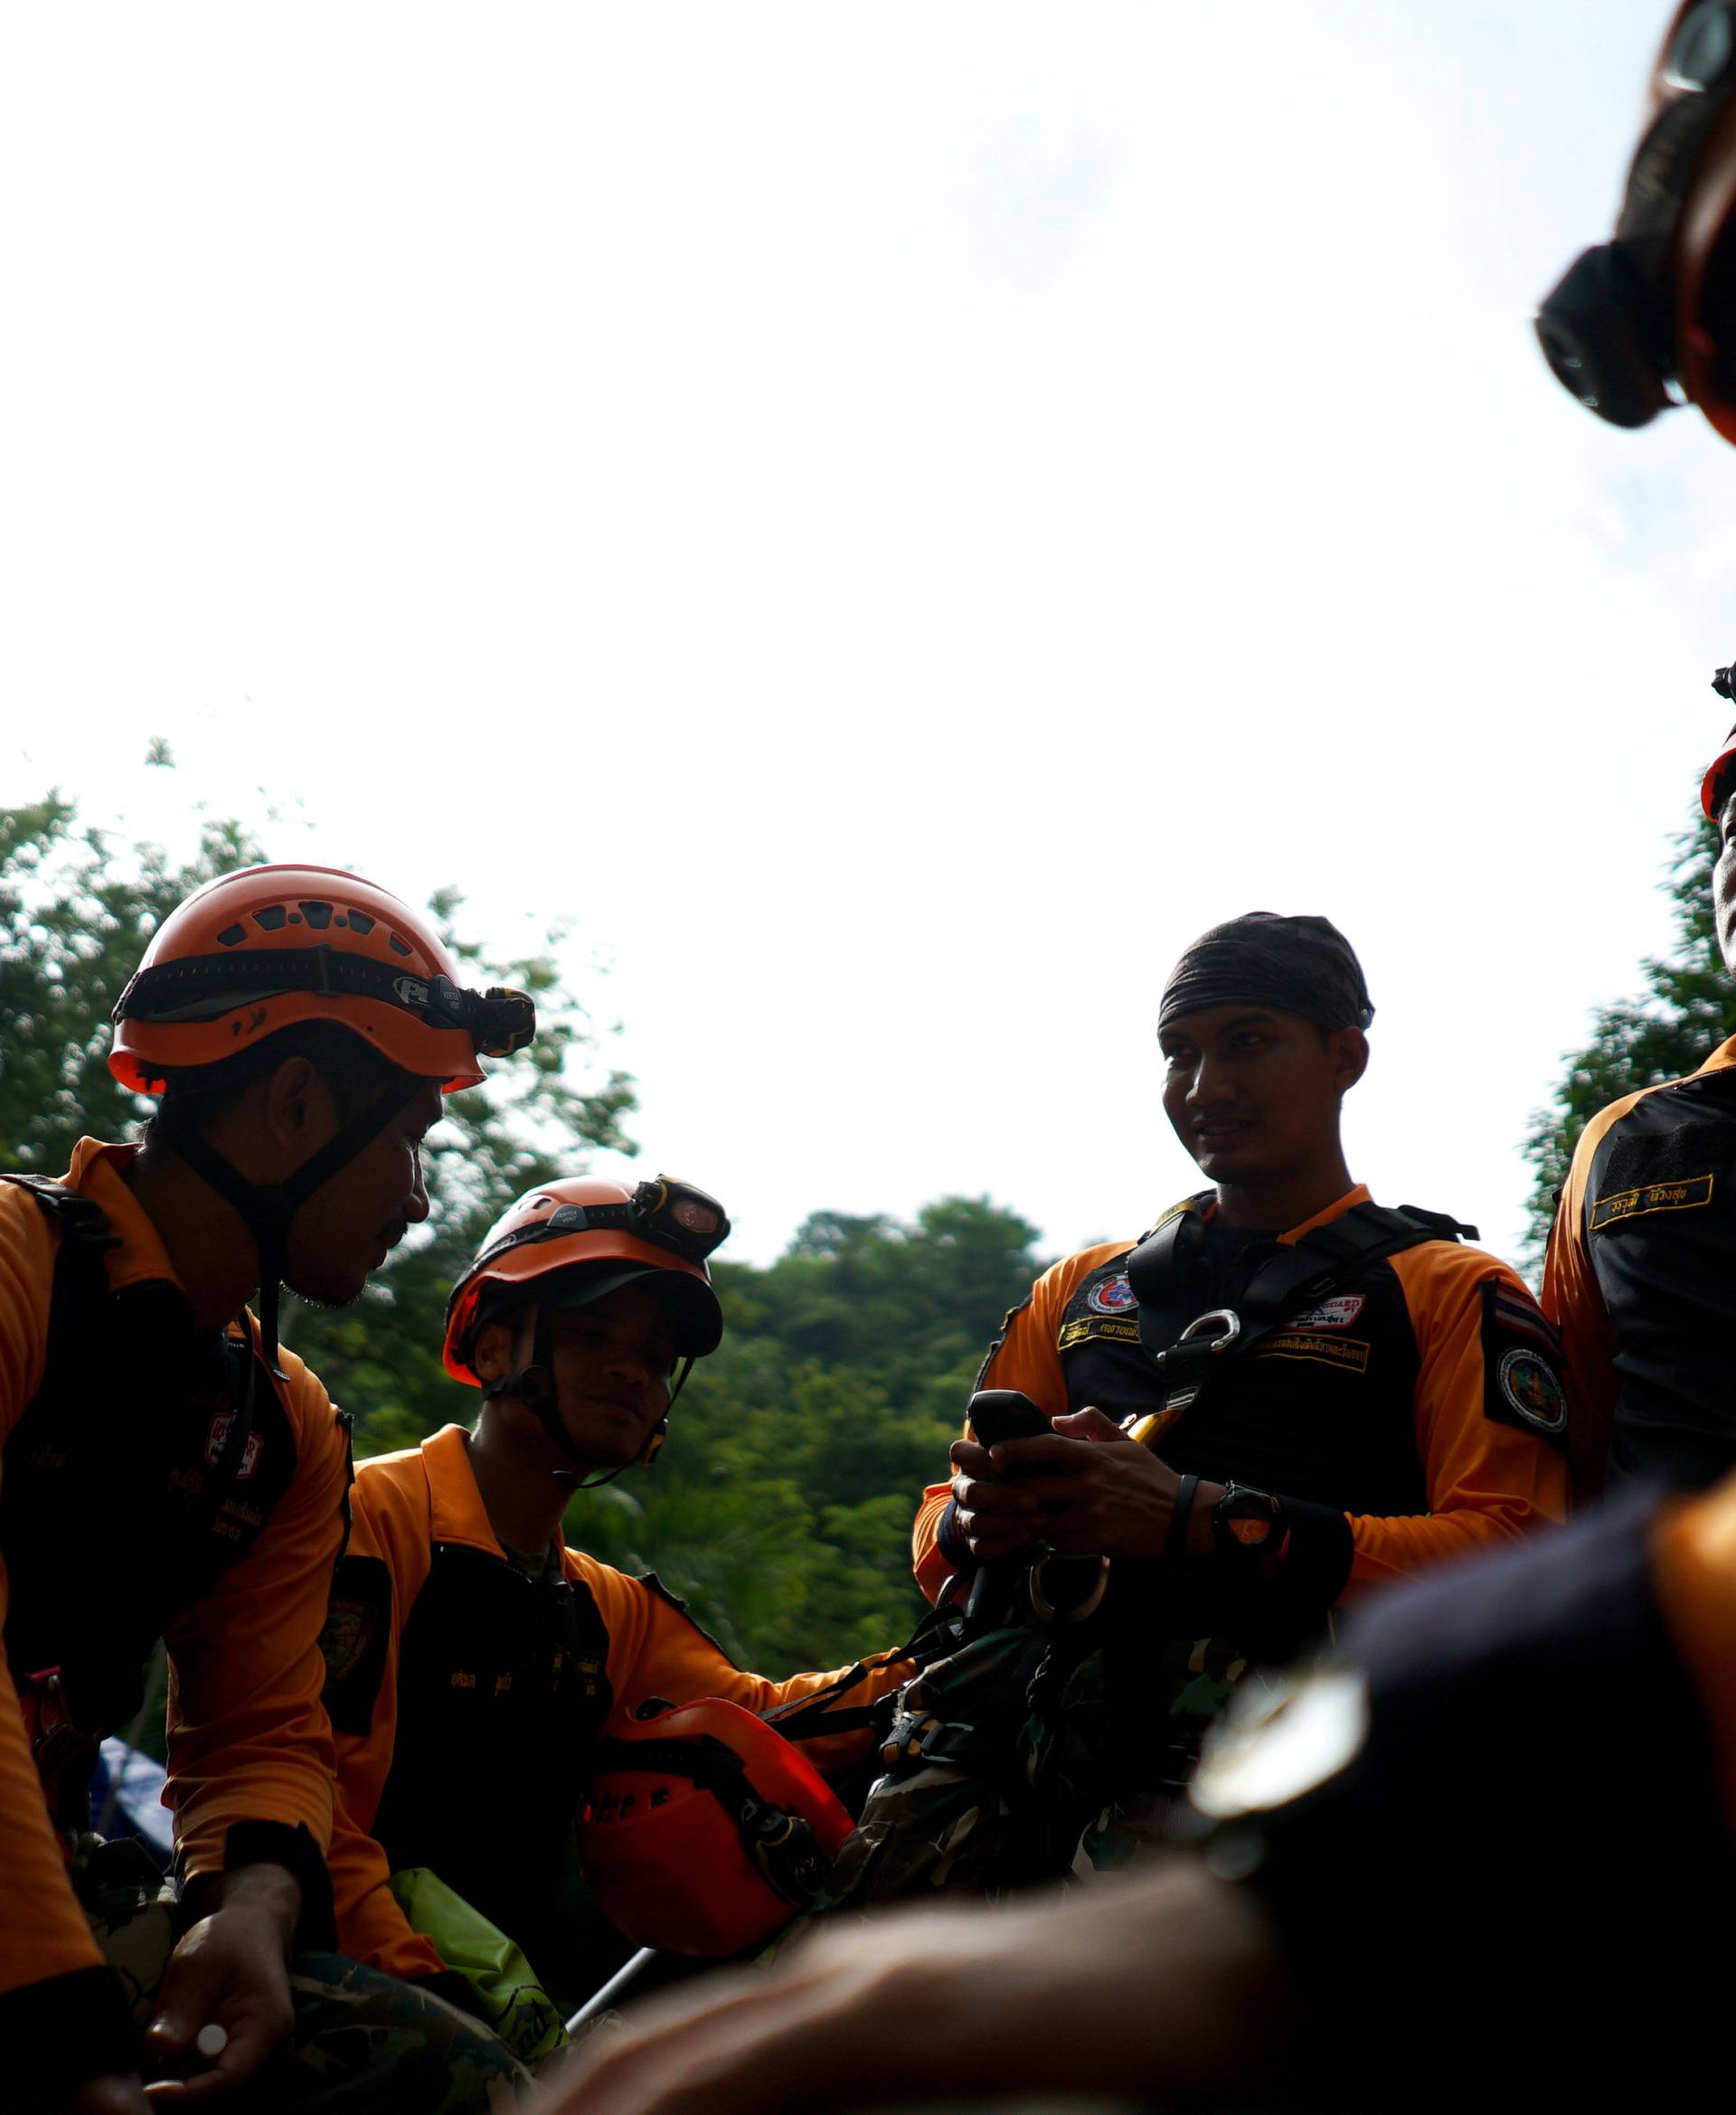 Rescue workers get ready to explore an area for shafts near the Tham Luang cave complex, where 12 boys and their soccer coach are trapped, in the northern province of Chiang Rai